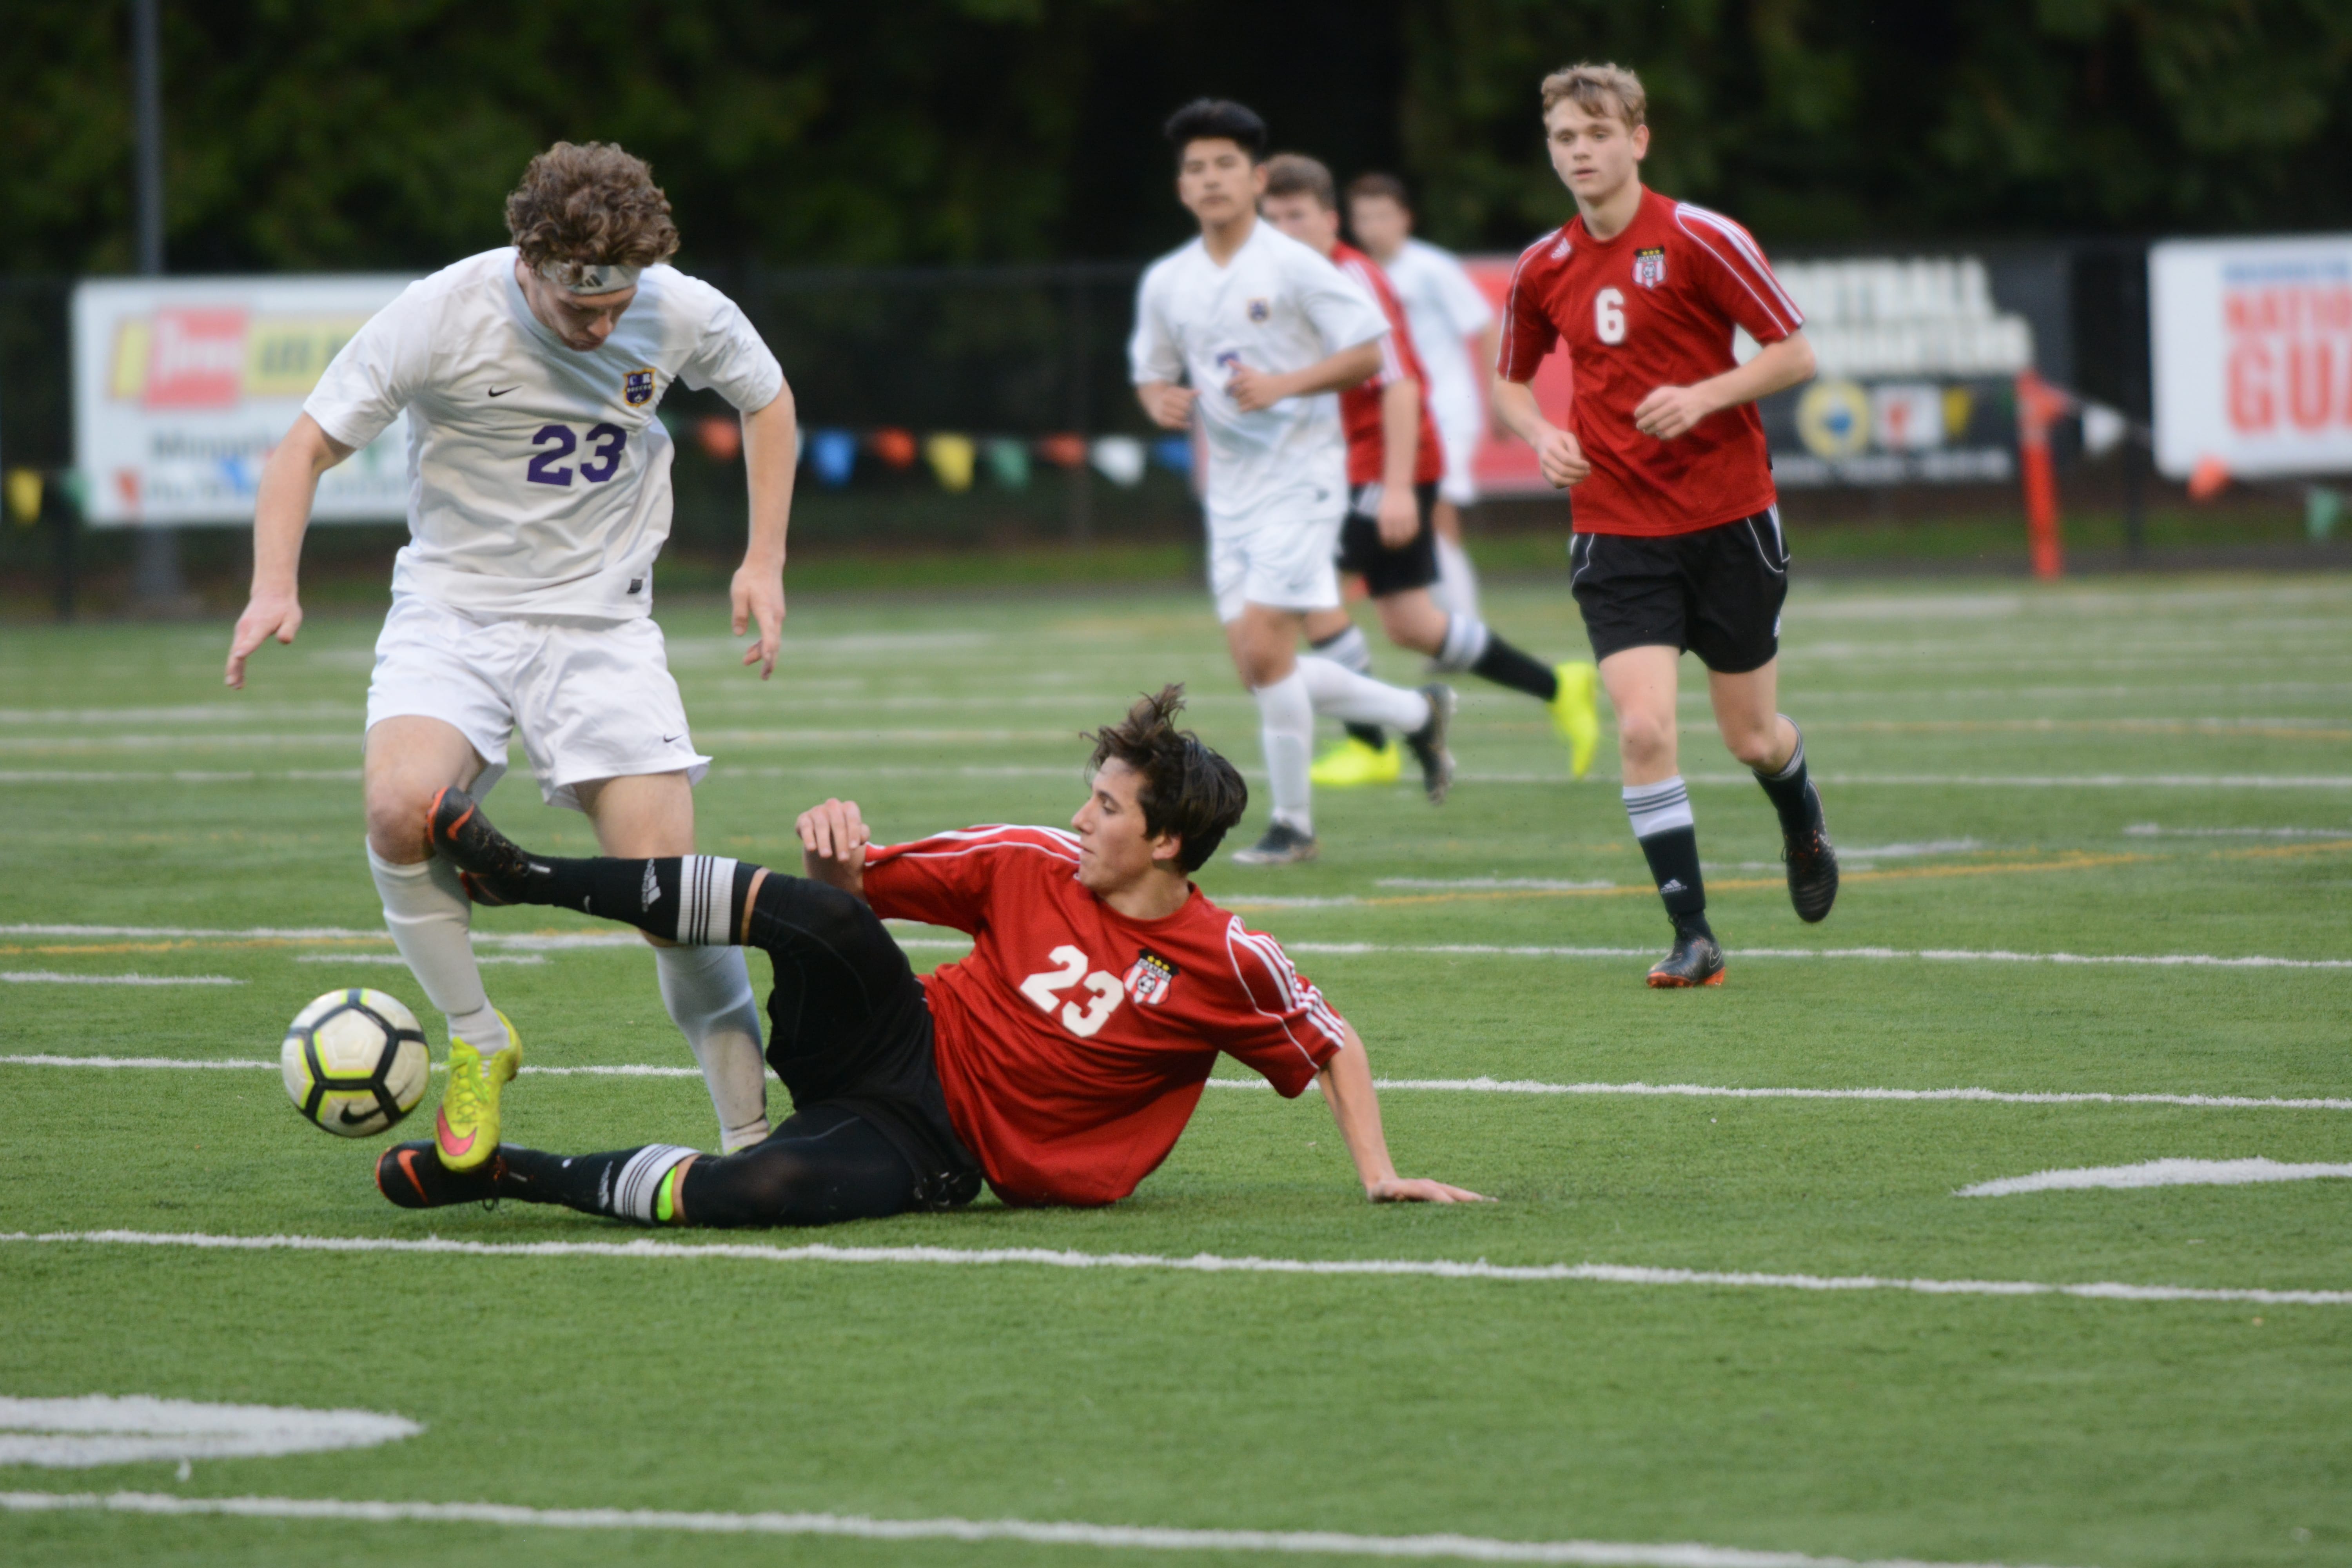 Camas freshman defender Gaven Myers pokes the ball free from Columbia River forward Ryan Connop in the first half of the Chieftains' 2-0 win over Camas on Saturday, March 10, 2018 at Kiggins Bowl (Andy Buhler/Columbian staff).